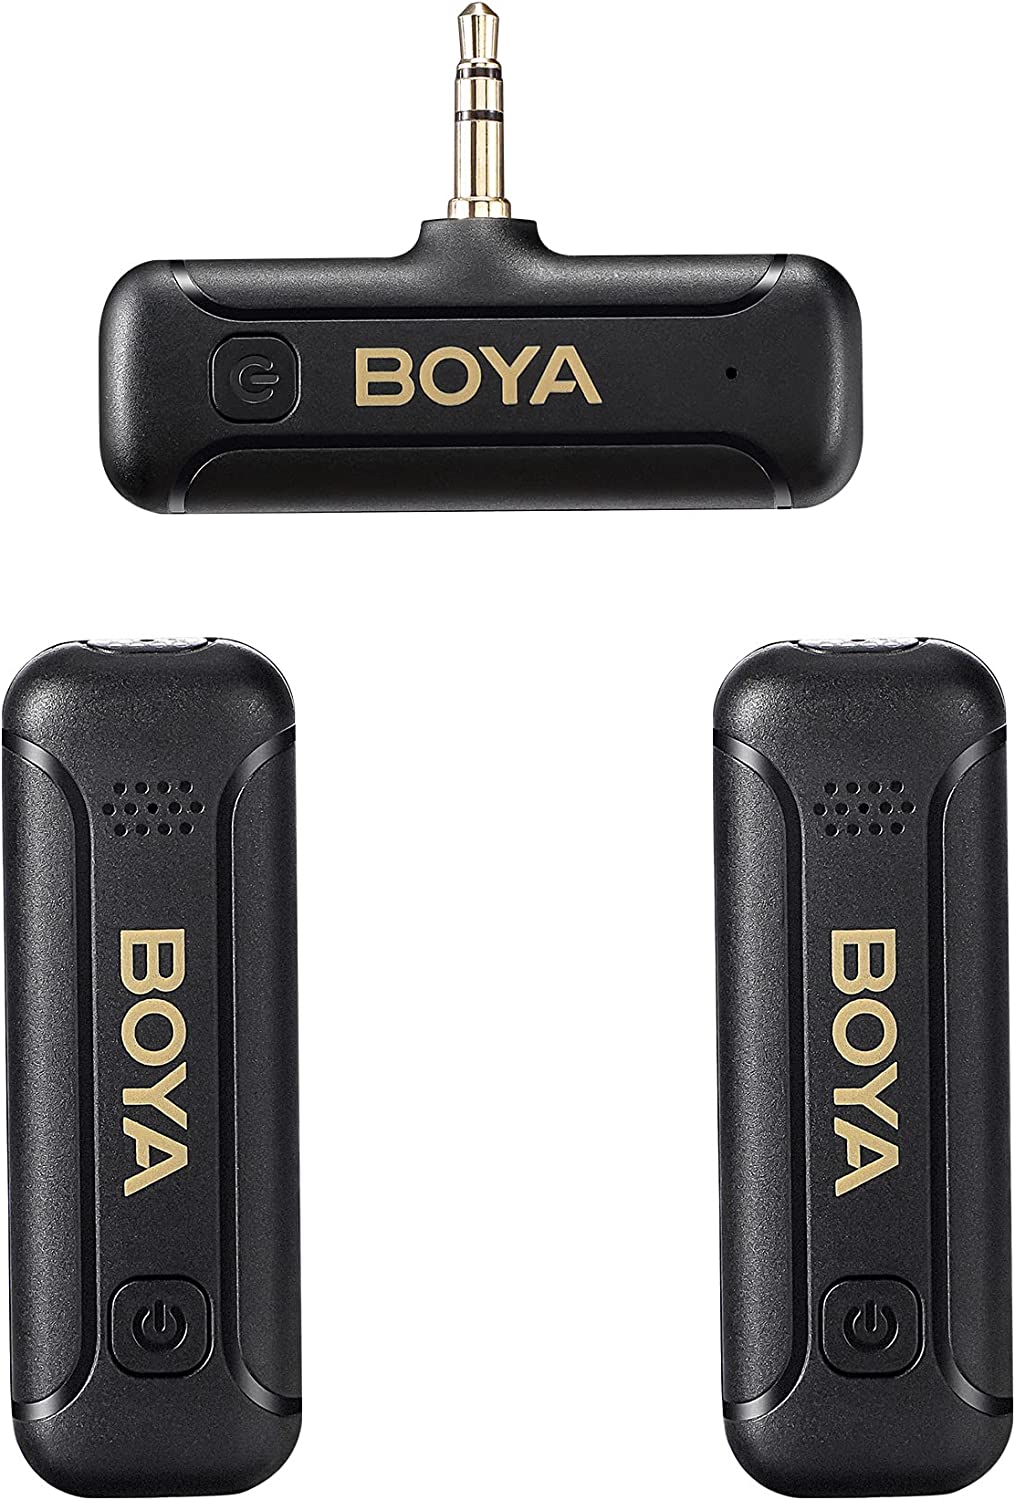 BOYA BY-WM3T2-M2 Wireless Lavalier Microphone for Camera Video Recording - 2 Transmitters & 1 Receiver Questions & Answers